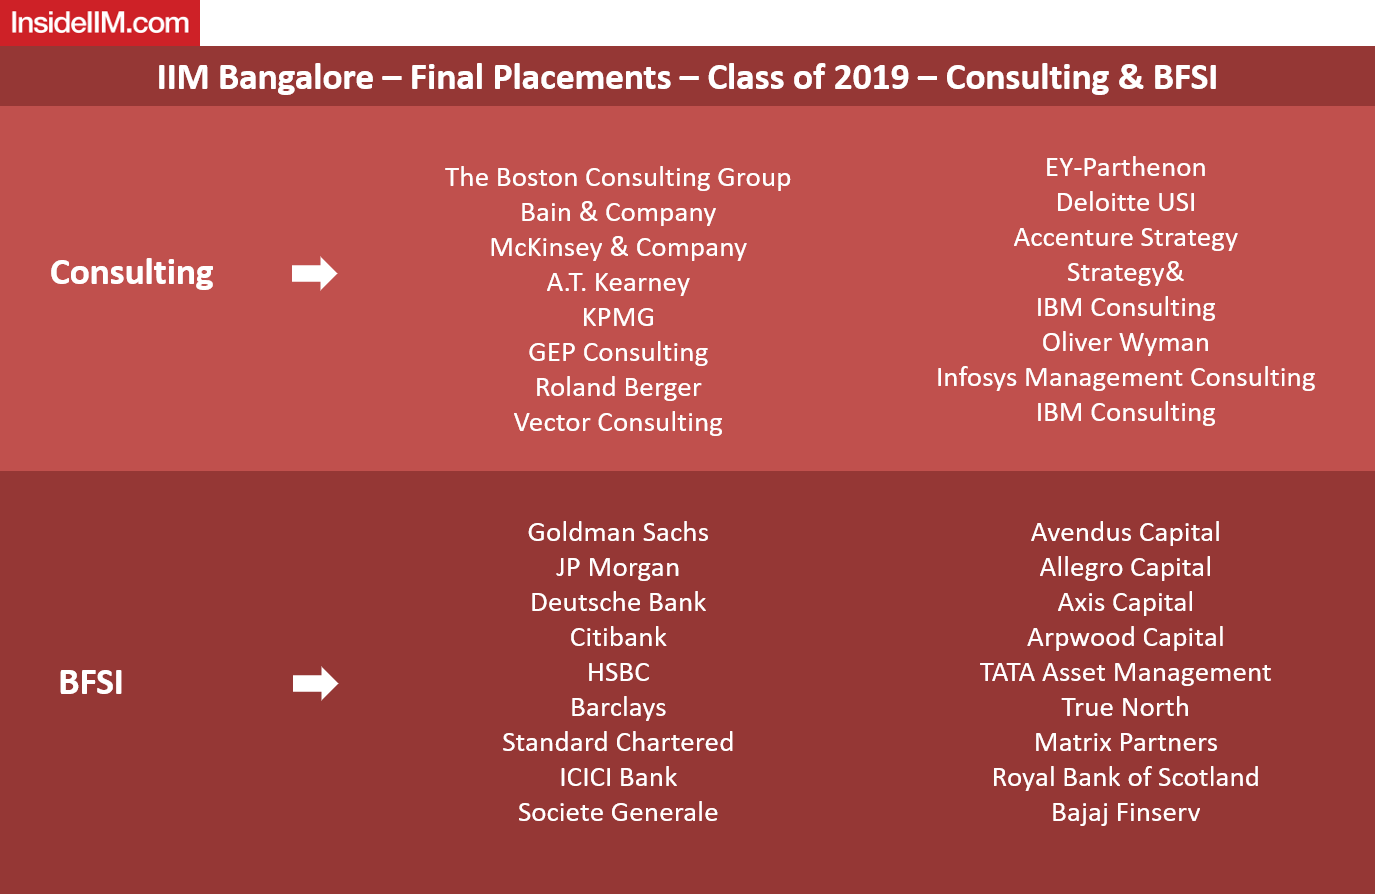 IIM Bangalore Final Placements 2019 - Consulting & BFSI